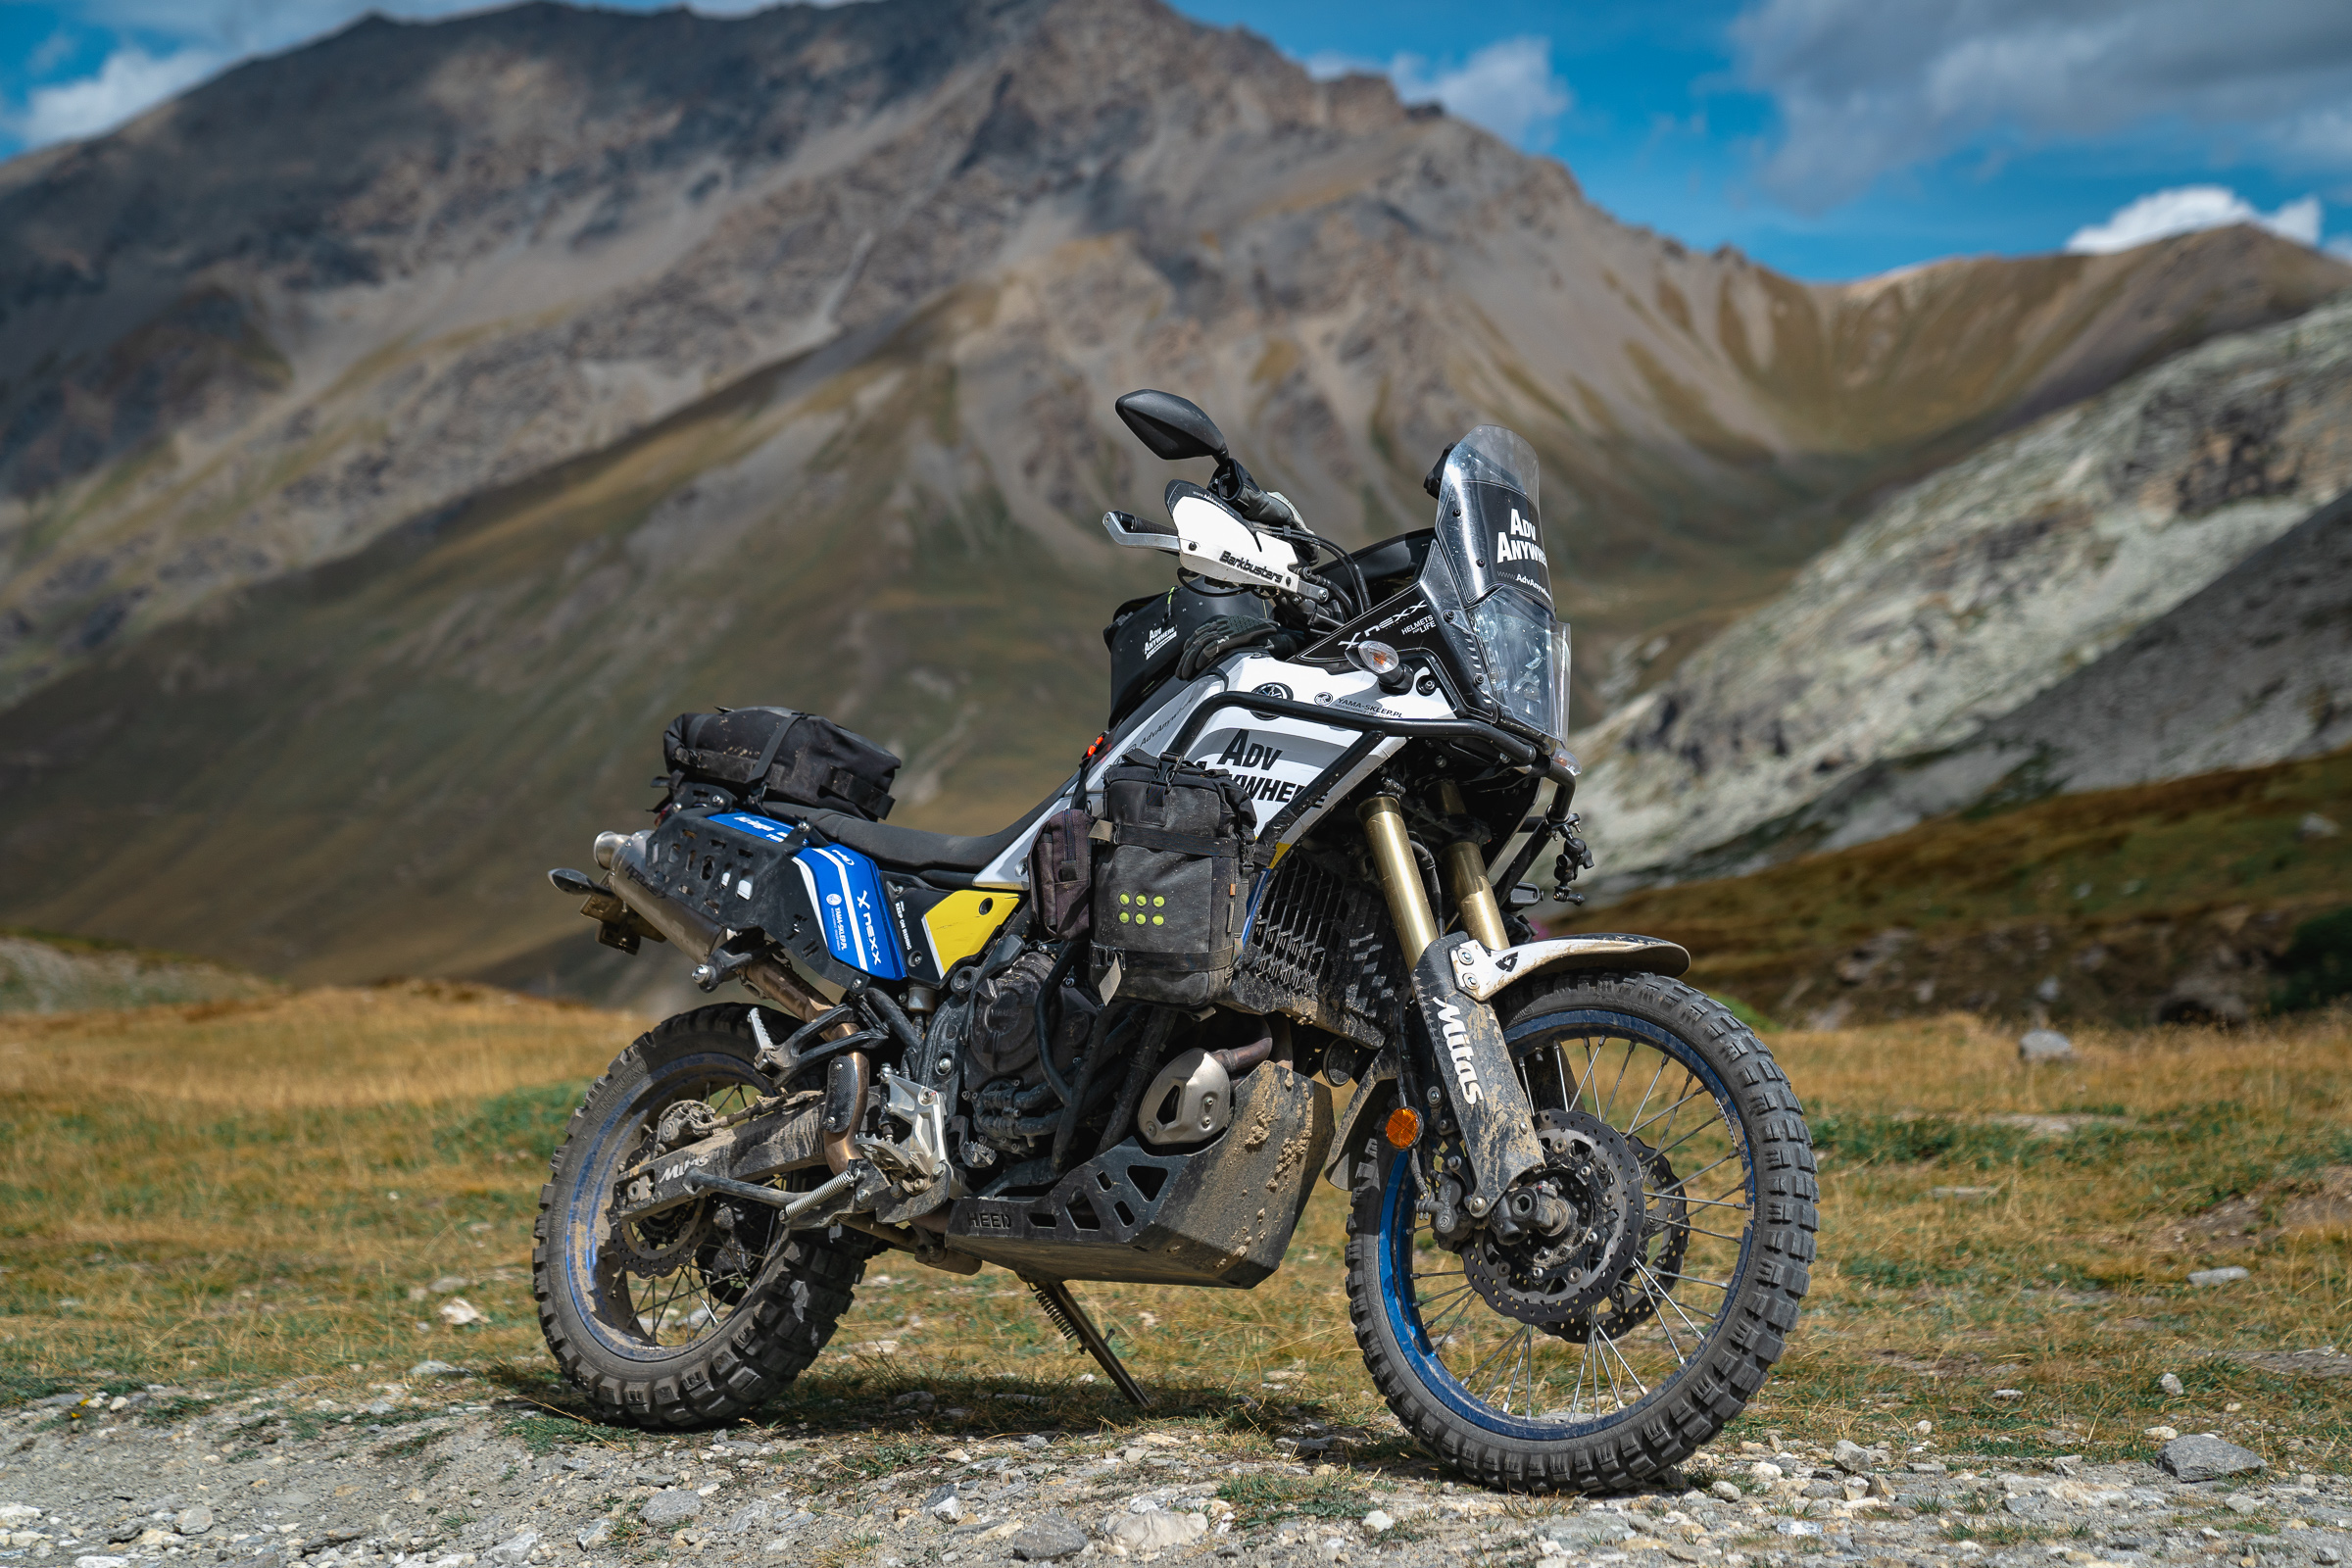 Yamaha Tenere 700 Review - Mad or Nomad